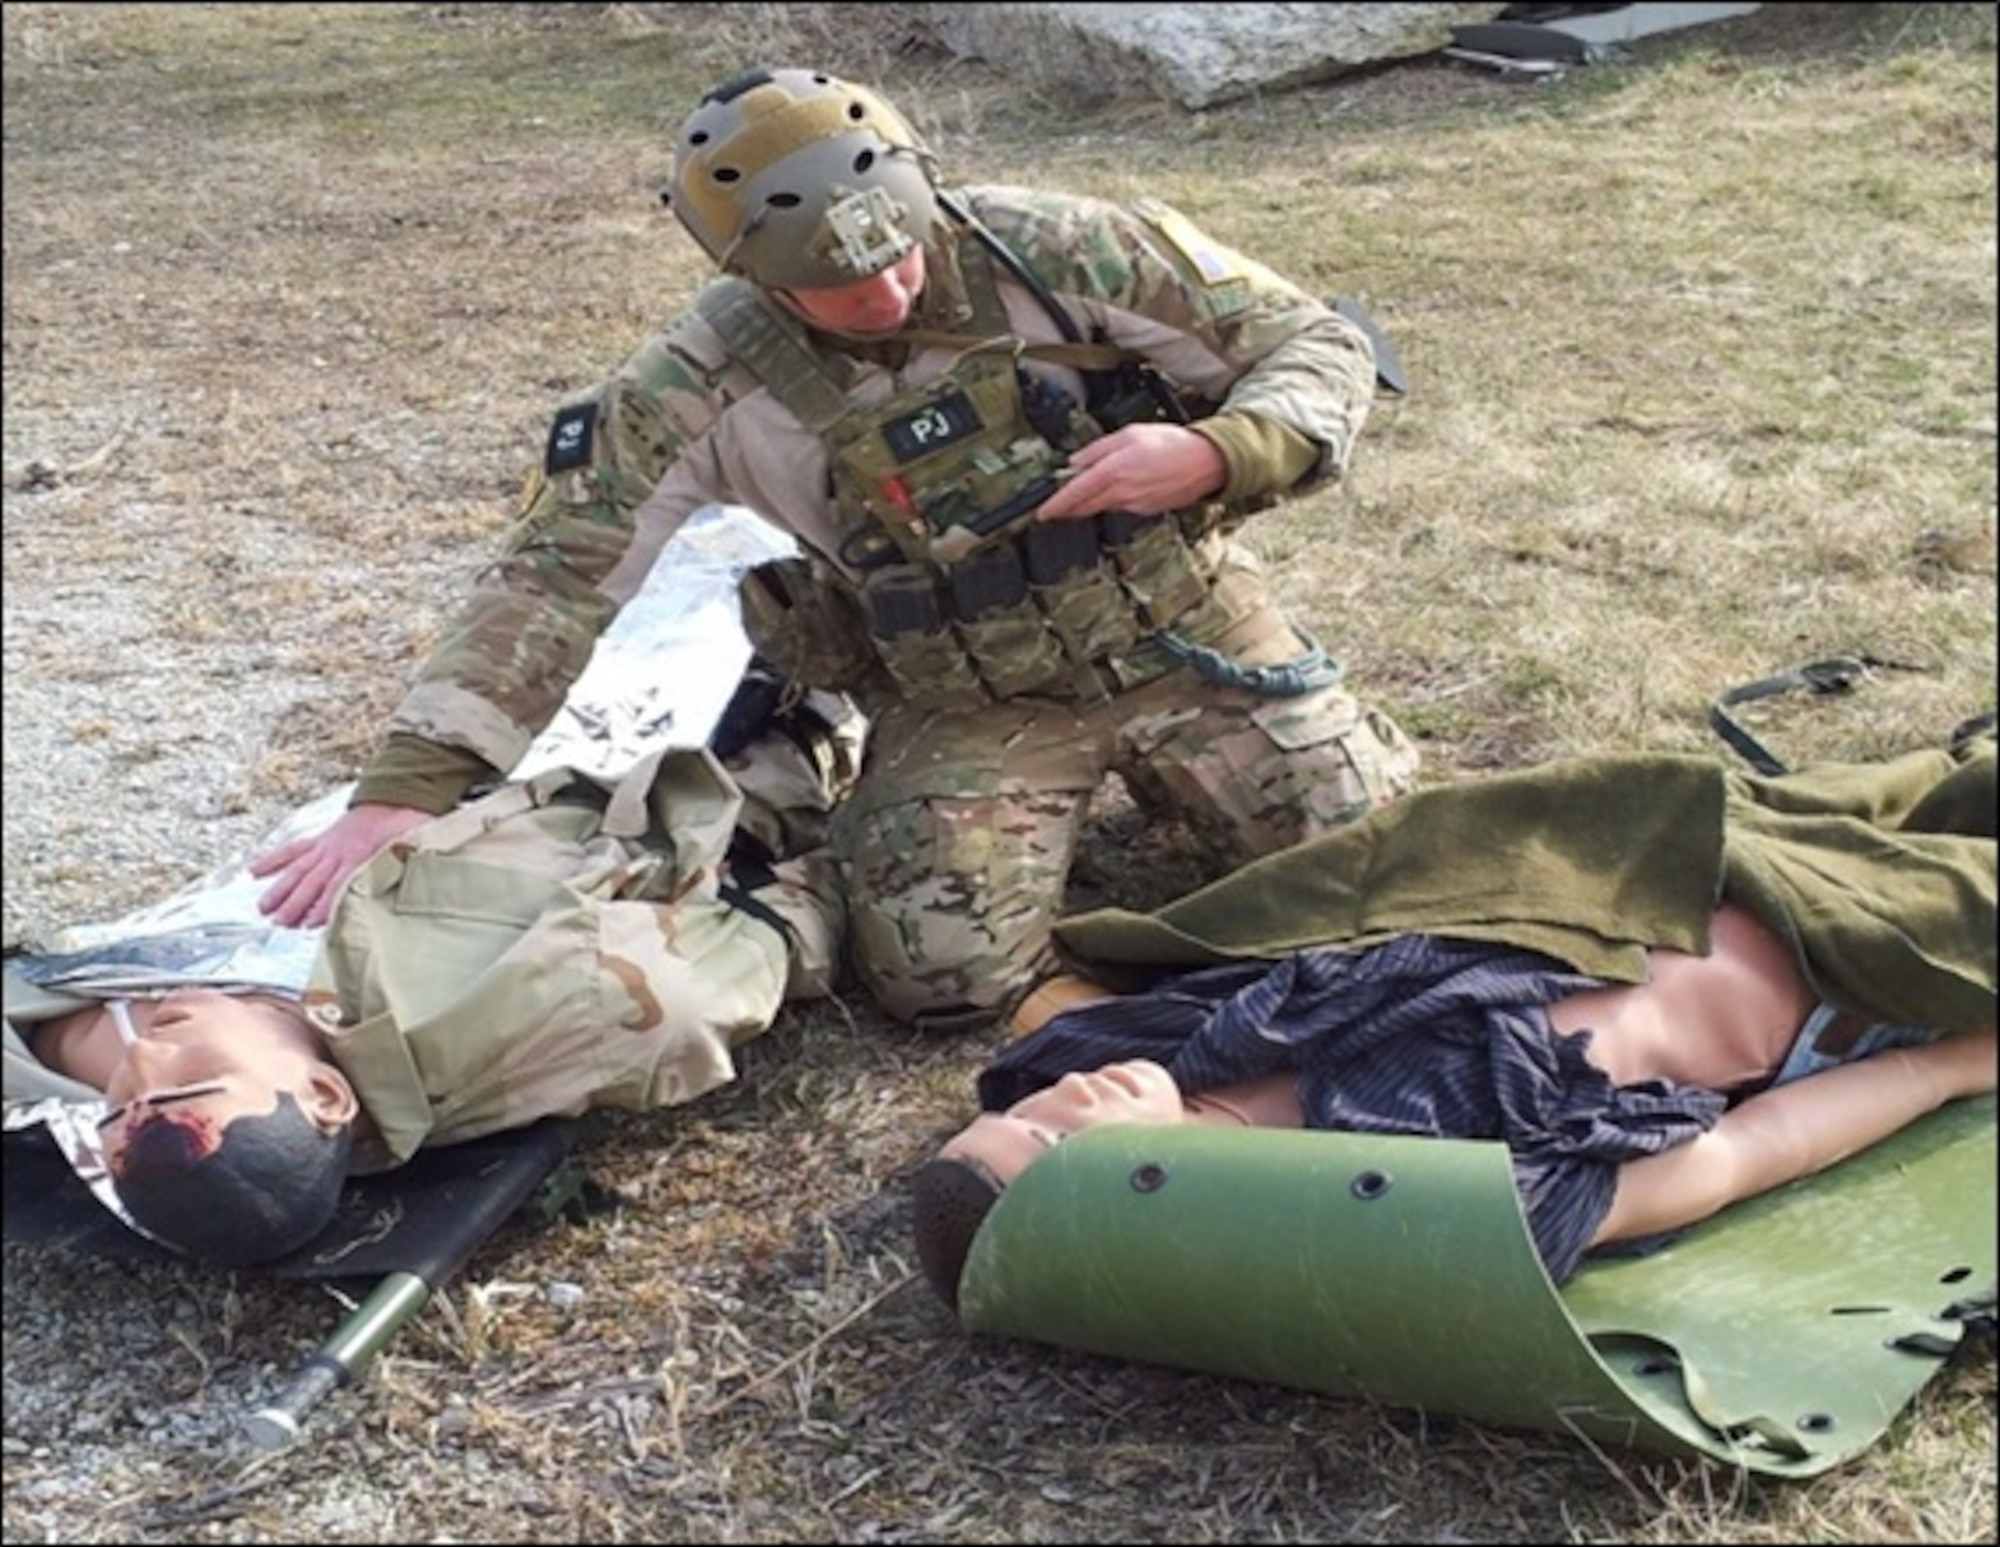 A pararescue jumper from the 123rd Special Tactics Squadron uses BATDOK in a mass casualty training exercise. (Courtesy photo/711th Human Performance Wing, Human Effectiveness Directorate)